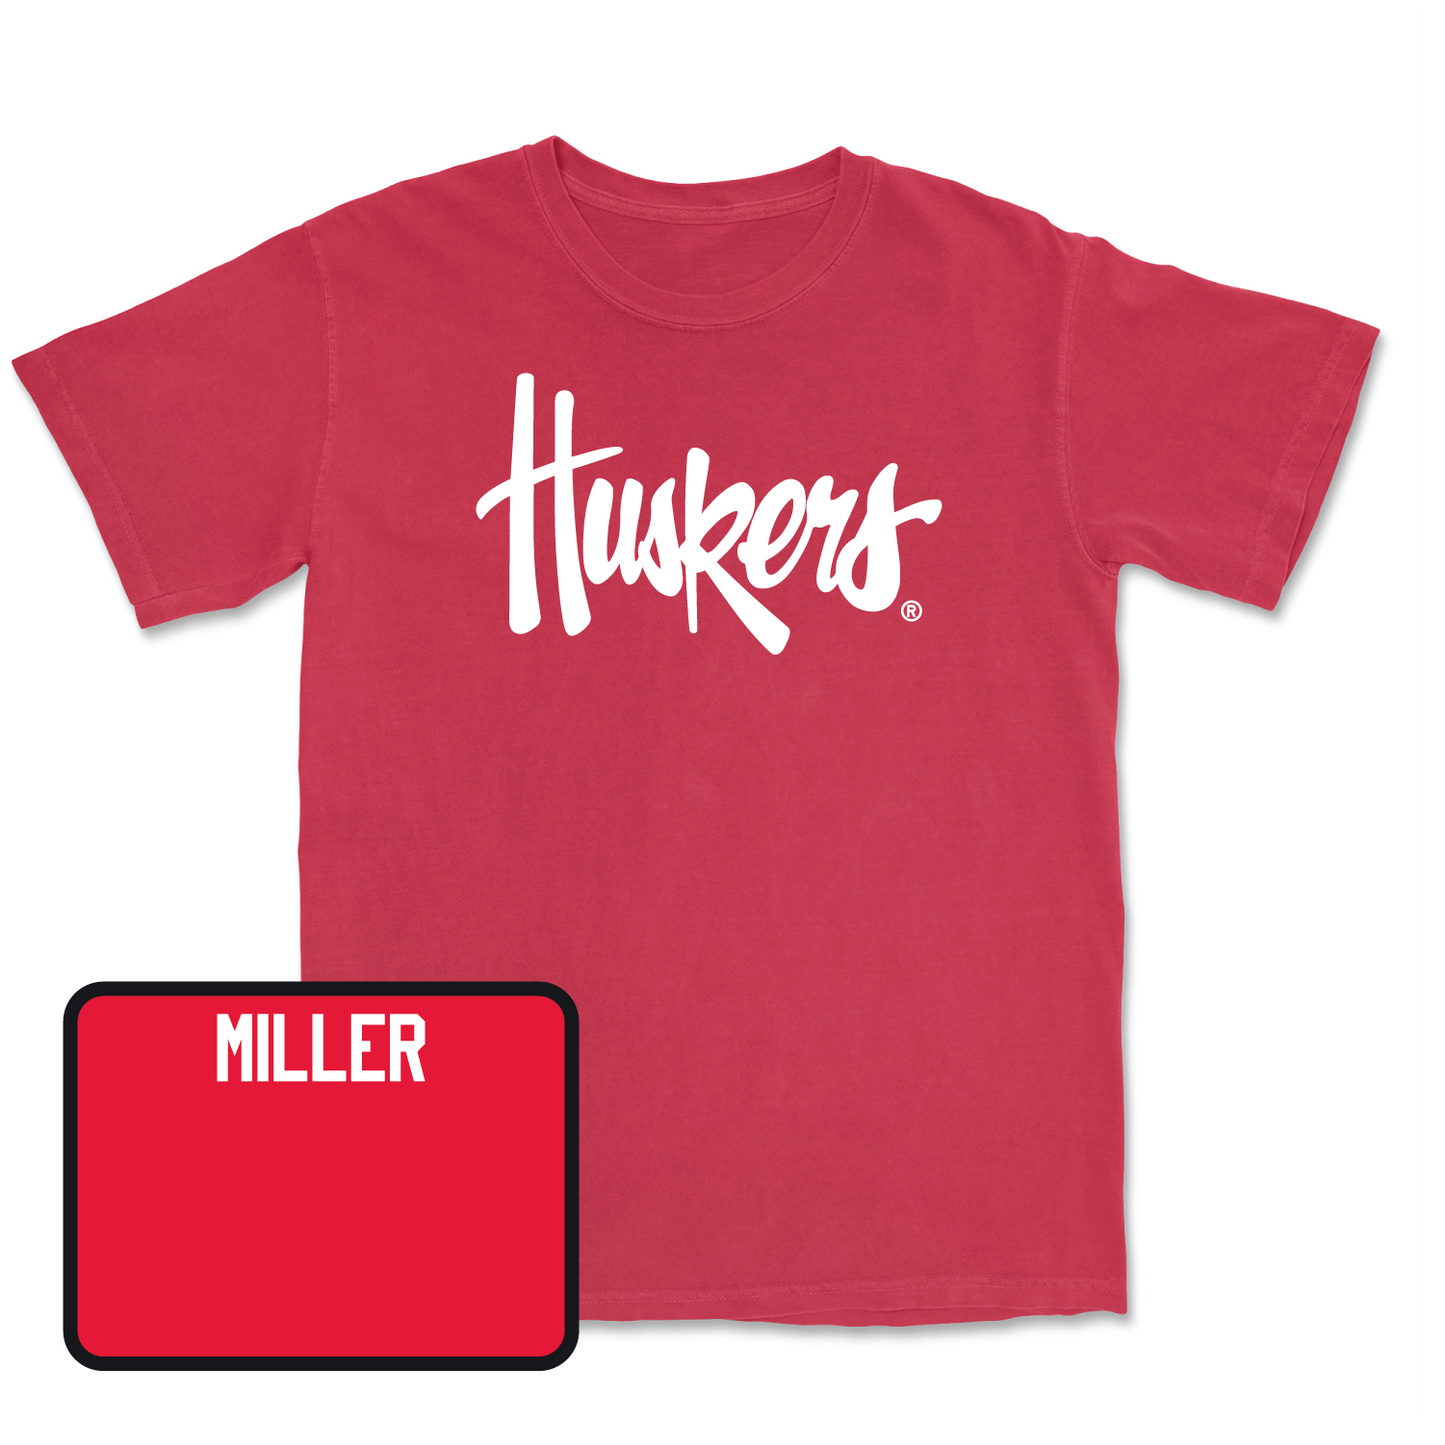 Red Track & Field Huskers Tee Youth Large / Brooklyn Miller